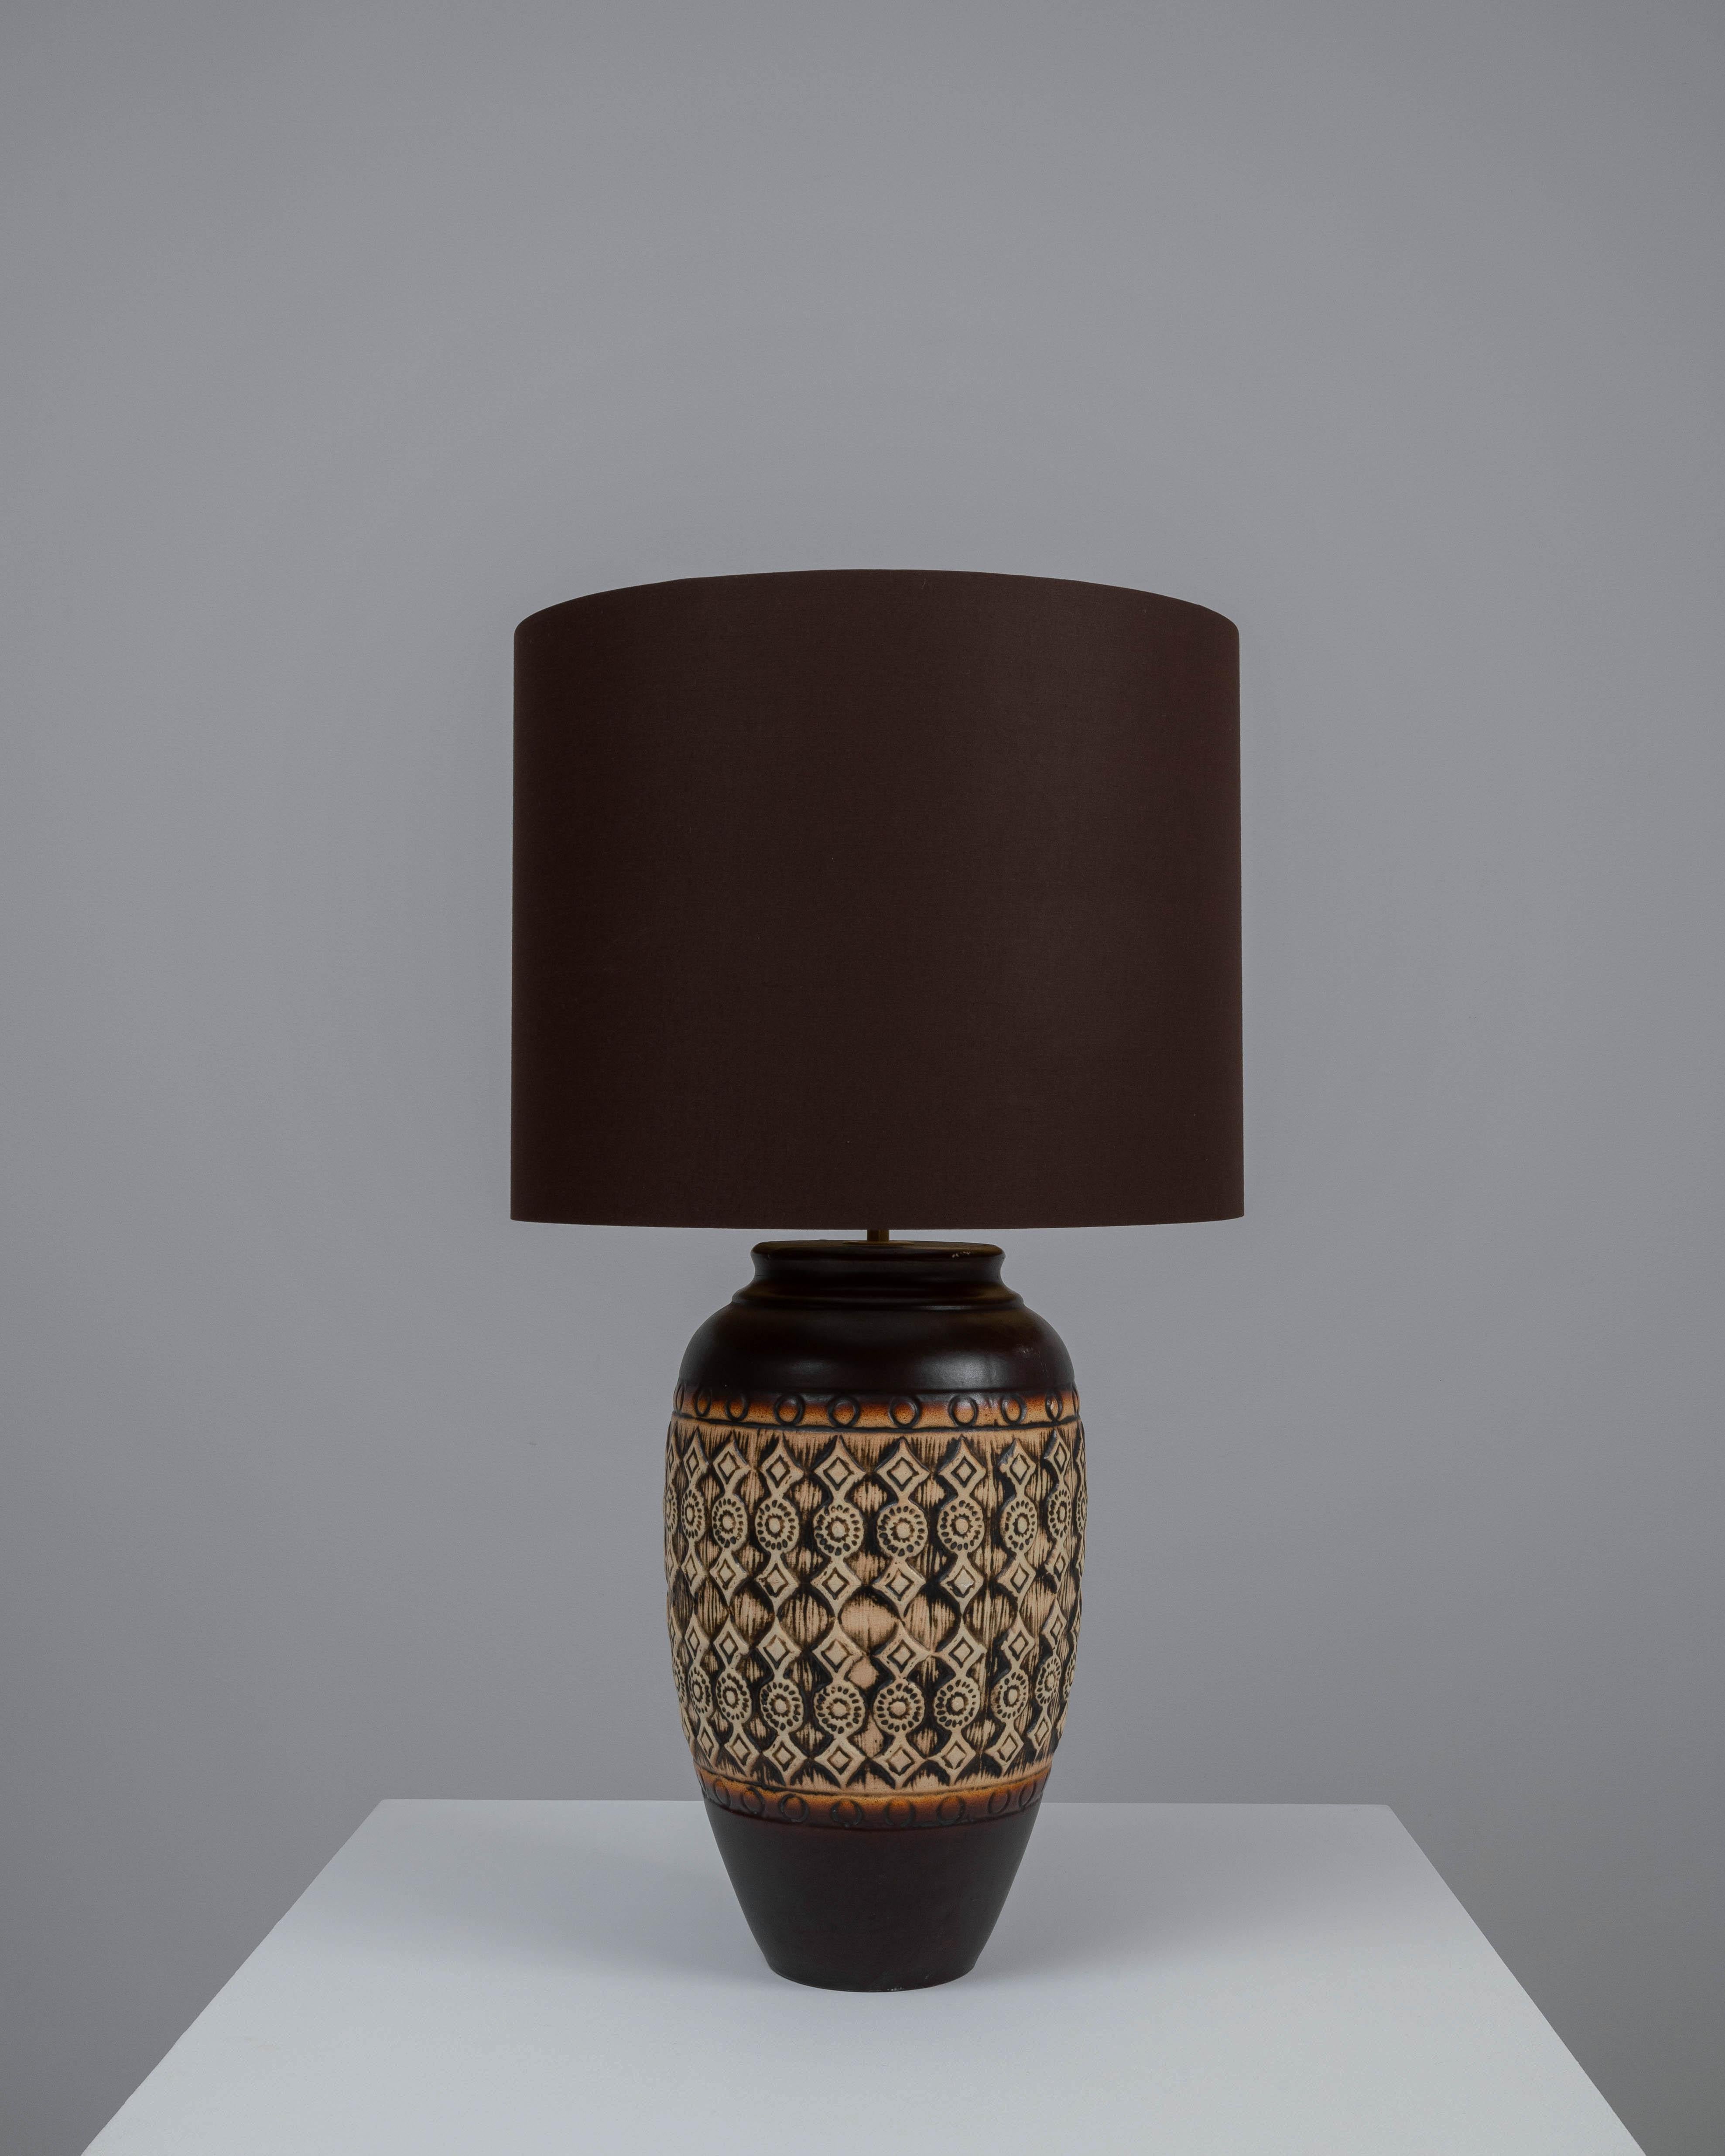 This 20th-century German ceramic table lamp is a celebration of pattern and texture. The lamp features a base adorned with an intricate tribal-inspired design, etched into the ceramic and brought to life with a warm, earthy glaze that complements